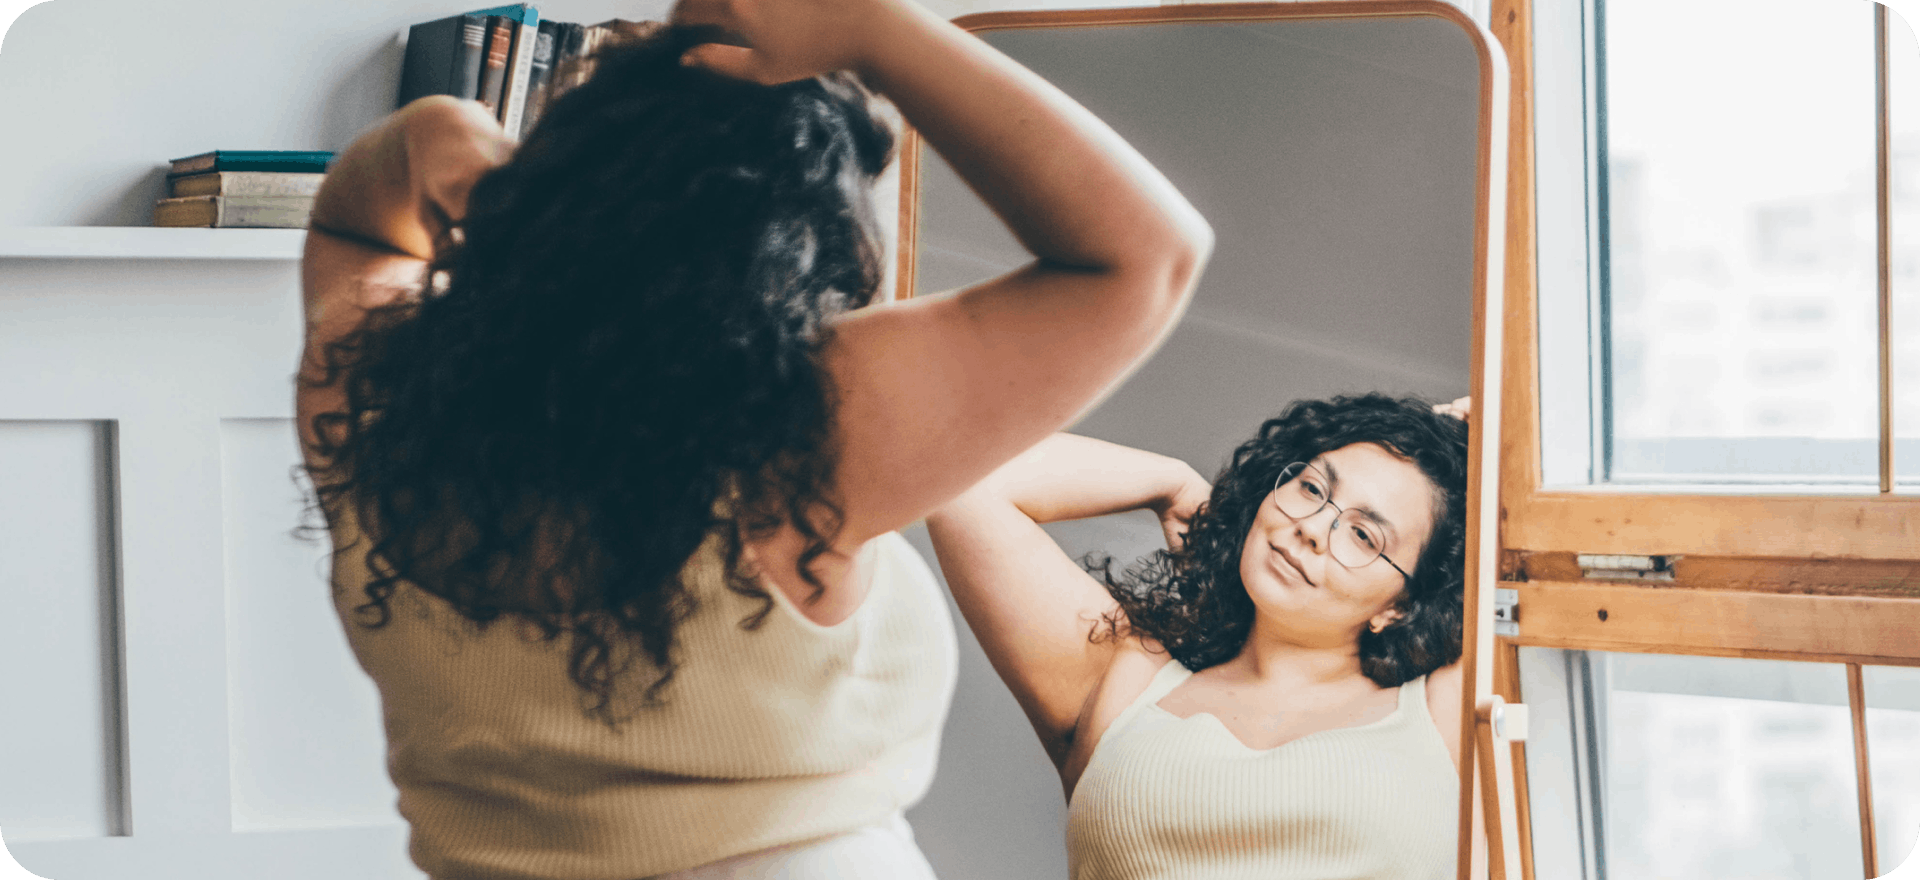 A woman stands before a mirror admiring herself. Caring for your appearance while undergoing the effects of cancer treatment on skin and hair is a sign of strength.